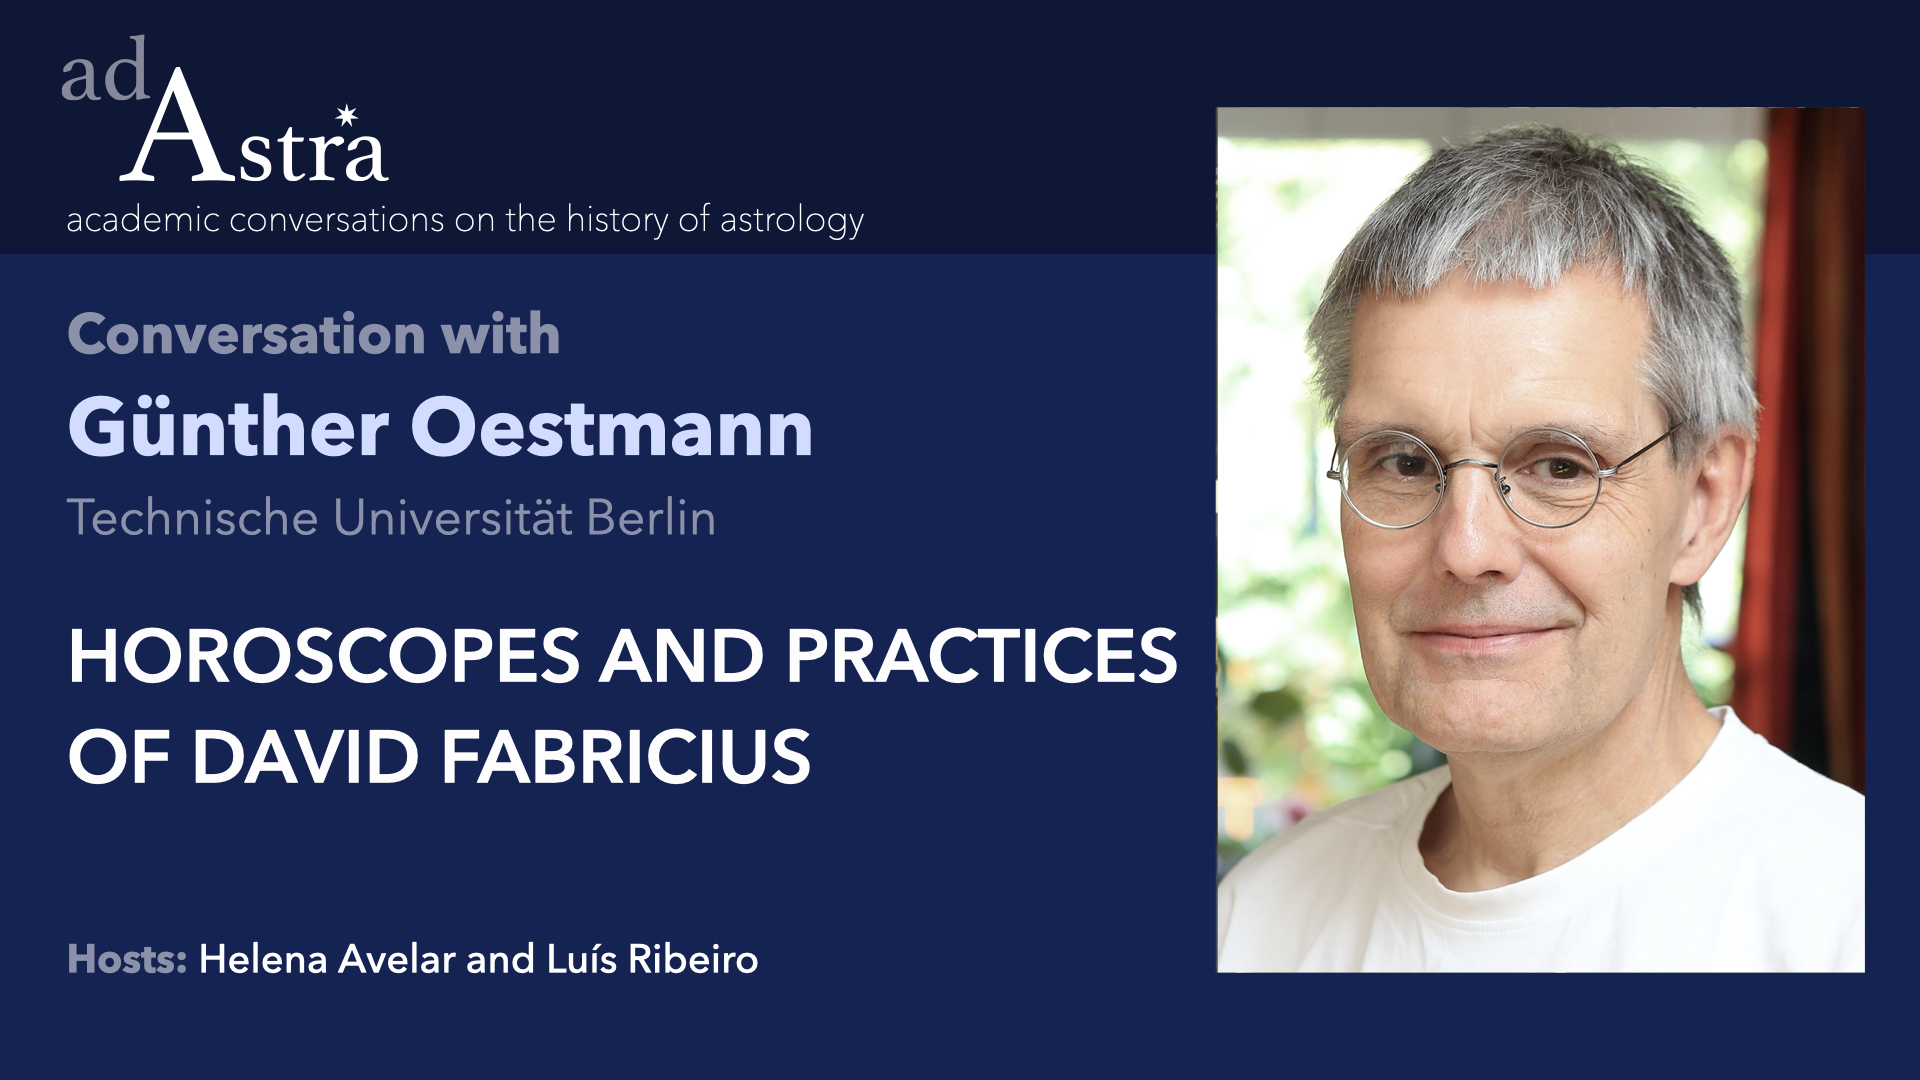 Horoscopes and practices of David Fabricius with Günther Oestmann